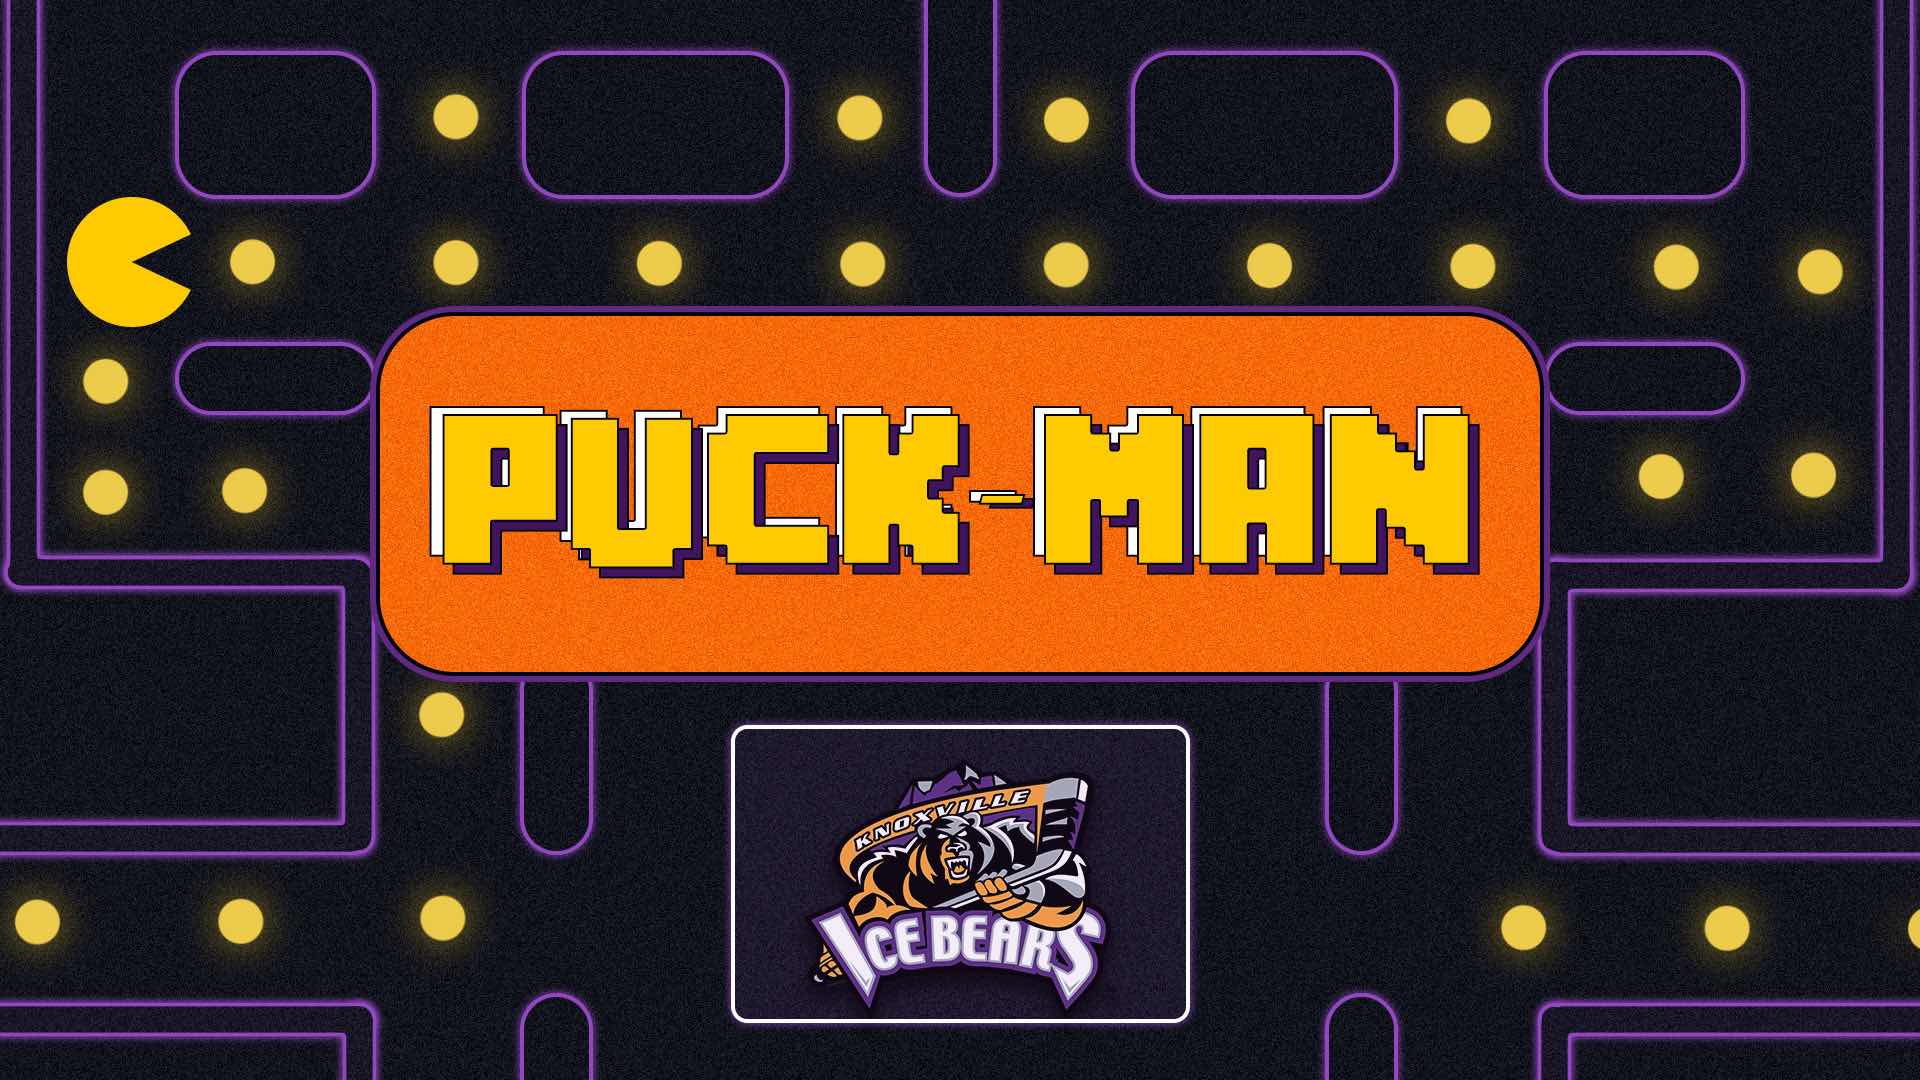 Knoxville Ice Bears Professional Hockey Puckman